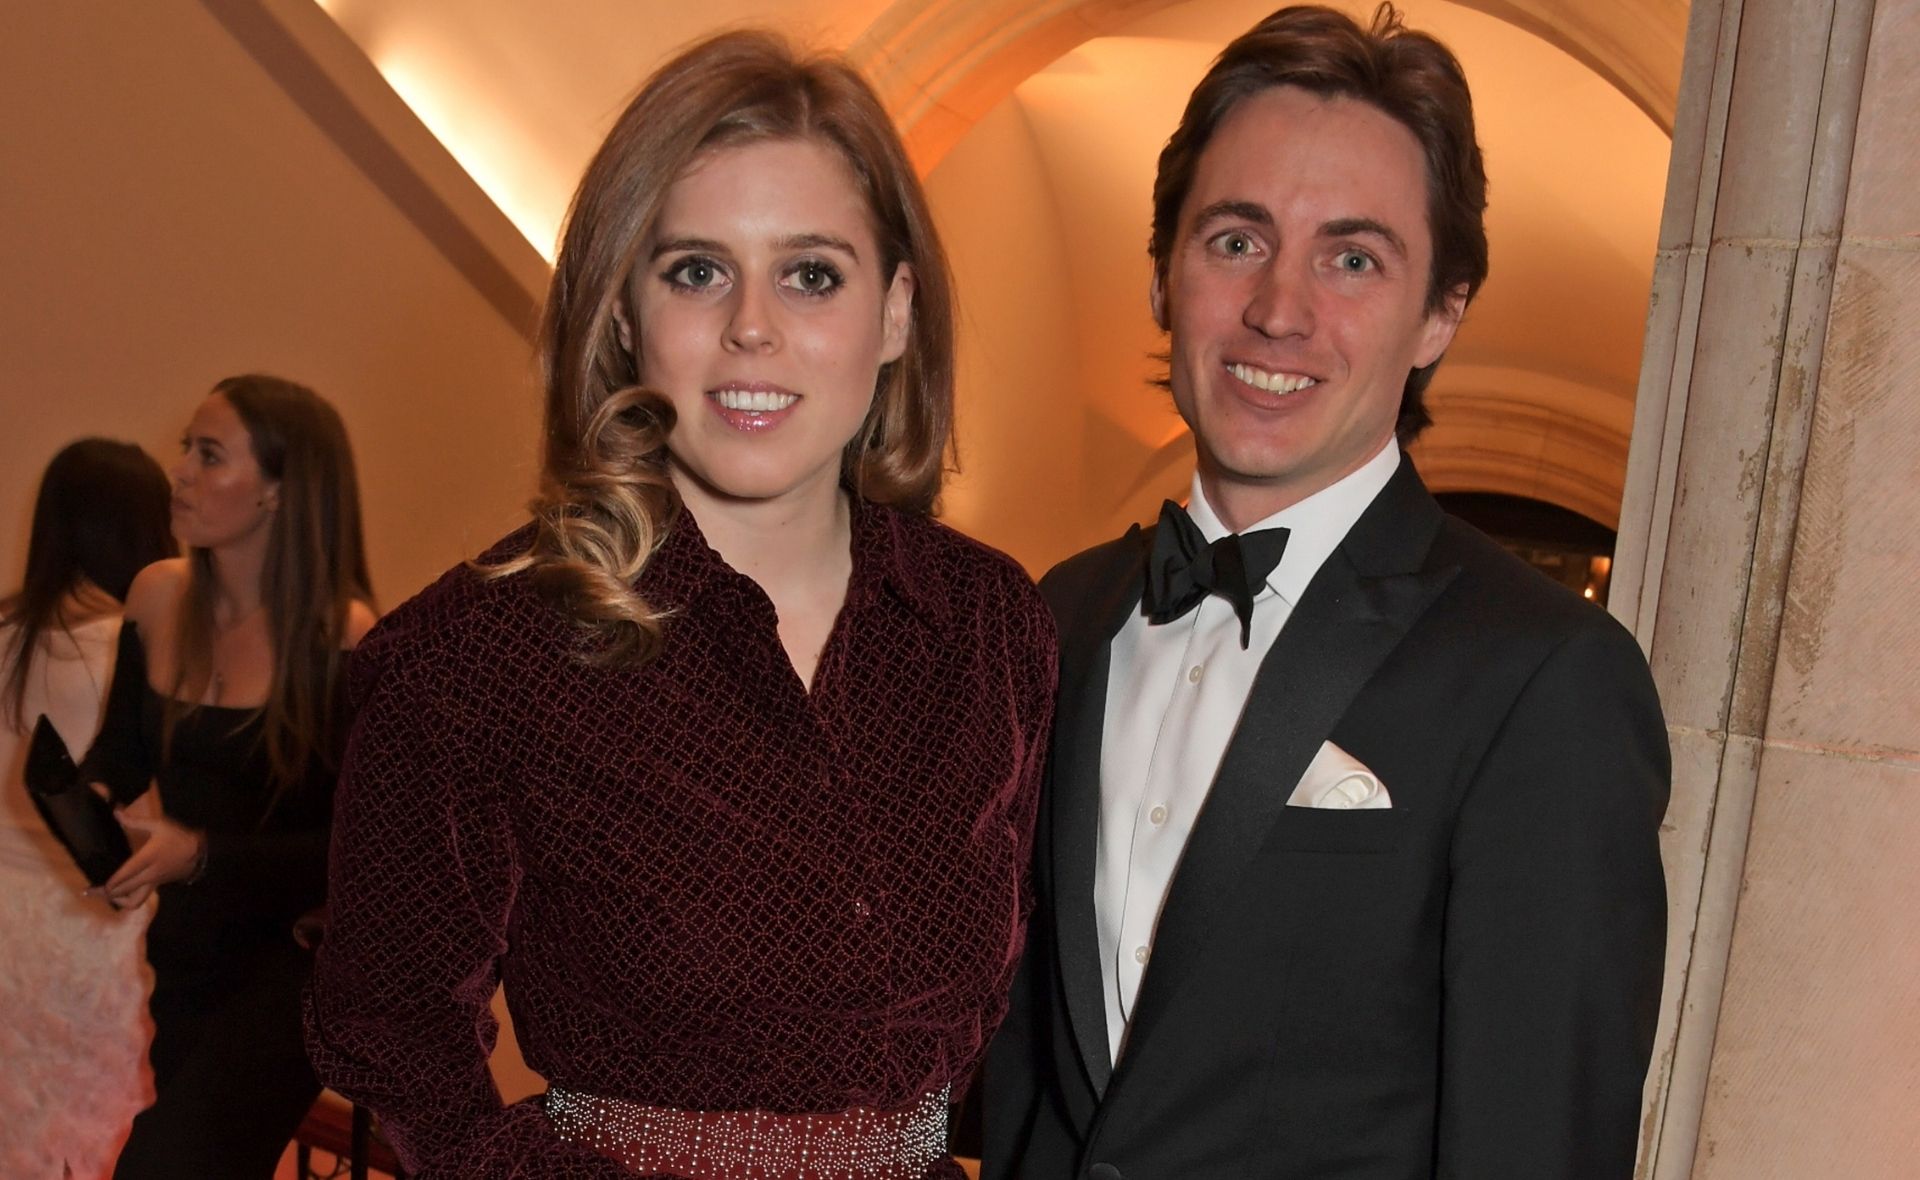 A pregnant Princess Beatrice reveals the heartwarming nickname she calls her stepson Wolfie as she discusses her dyslexia and her unborn baby